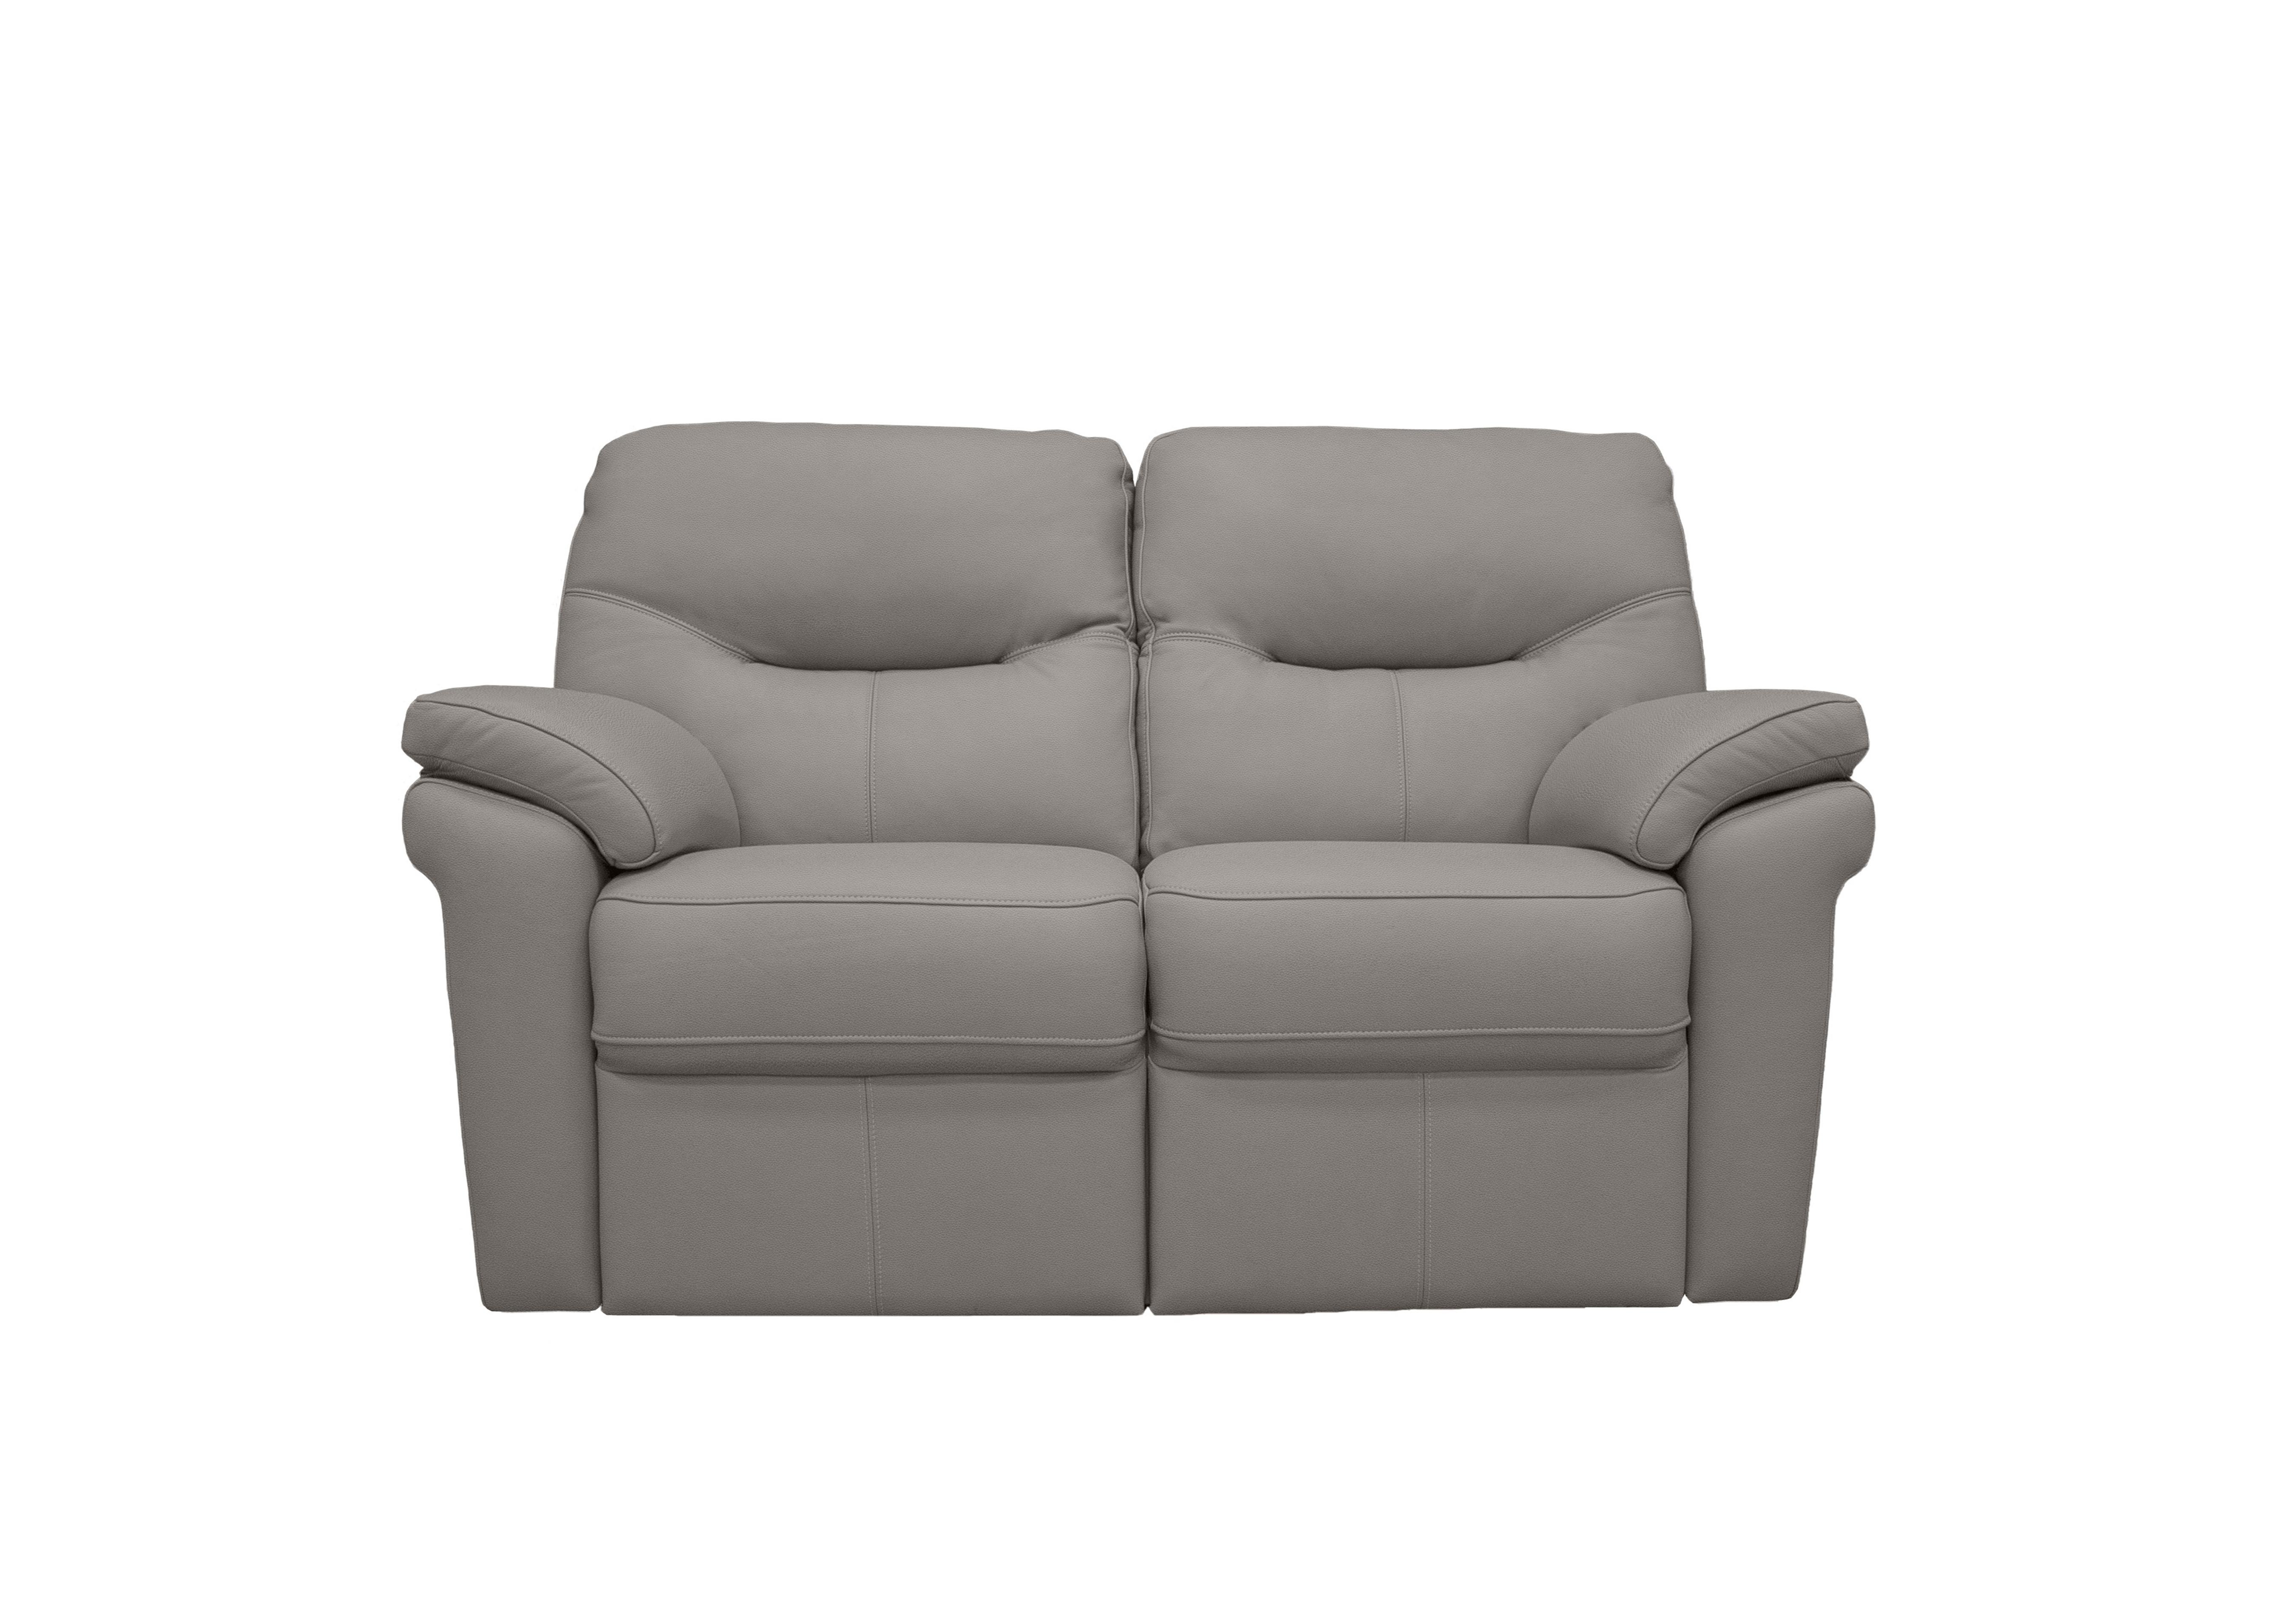 Seattle 2 Seater Leather Sofa in L842 Cambridge Grey on Furniture Village